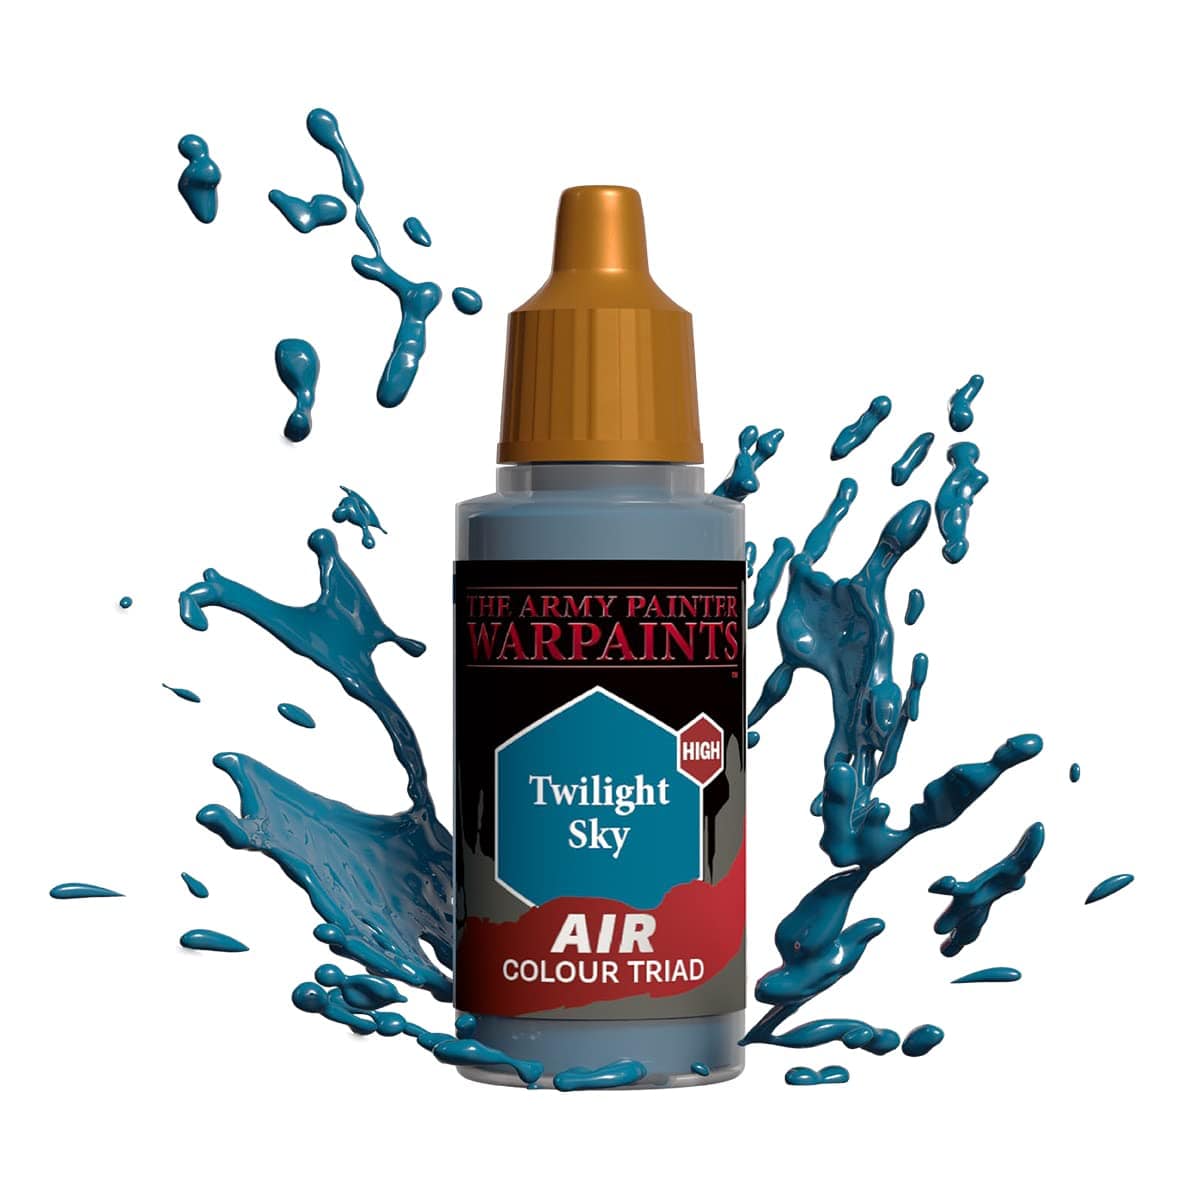 The Army Painter Accessories The Army Painter Warpaints Air: Twilight Sky 18ml